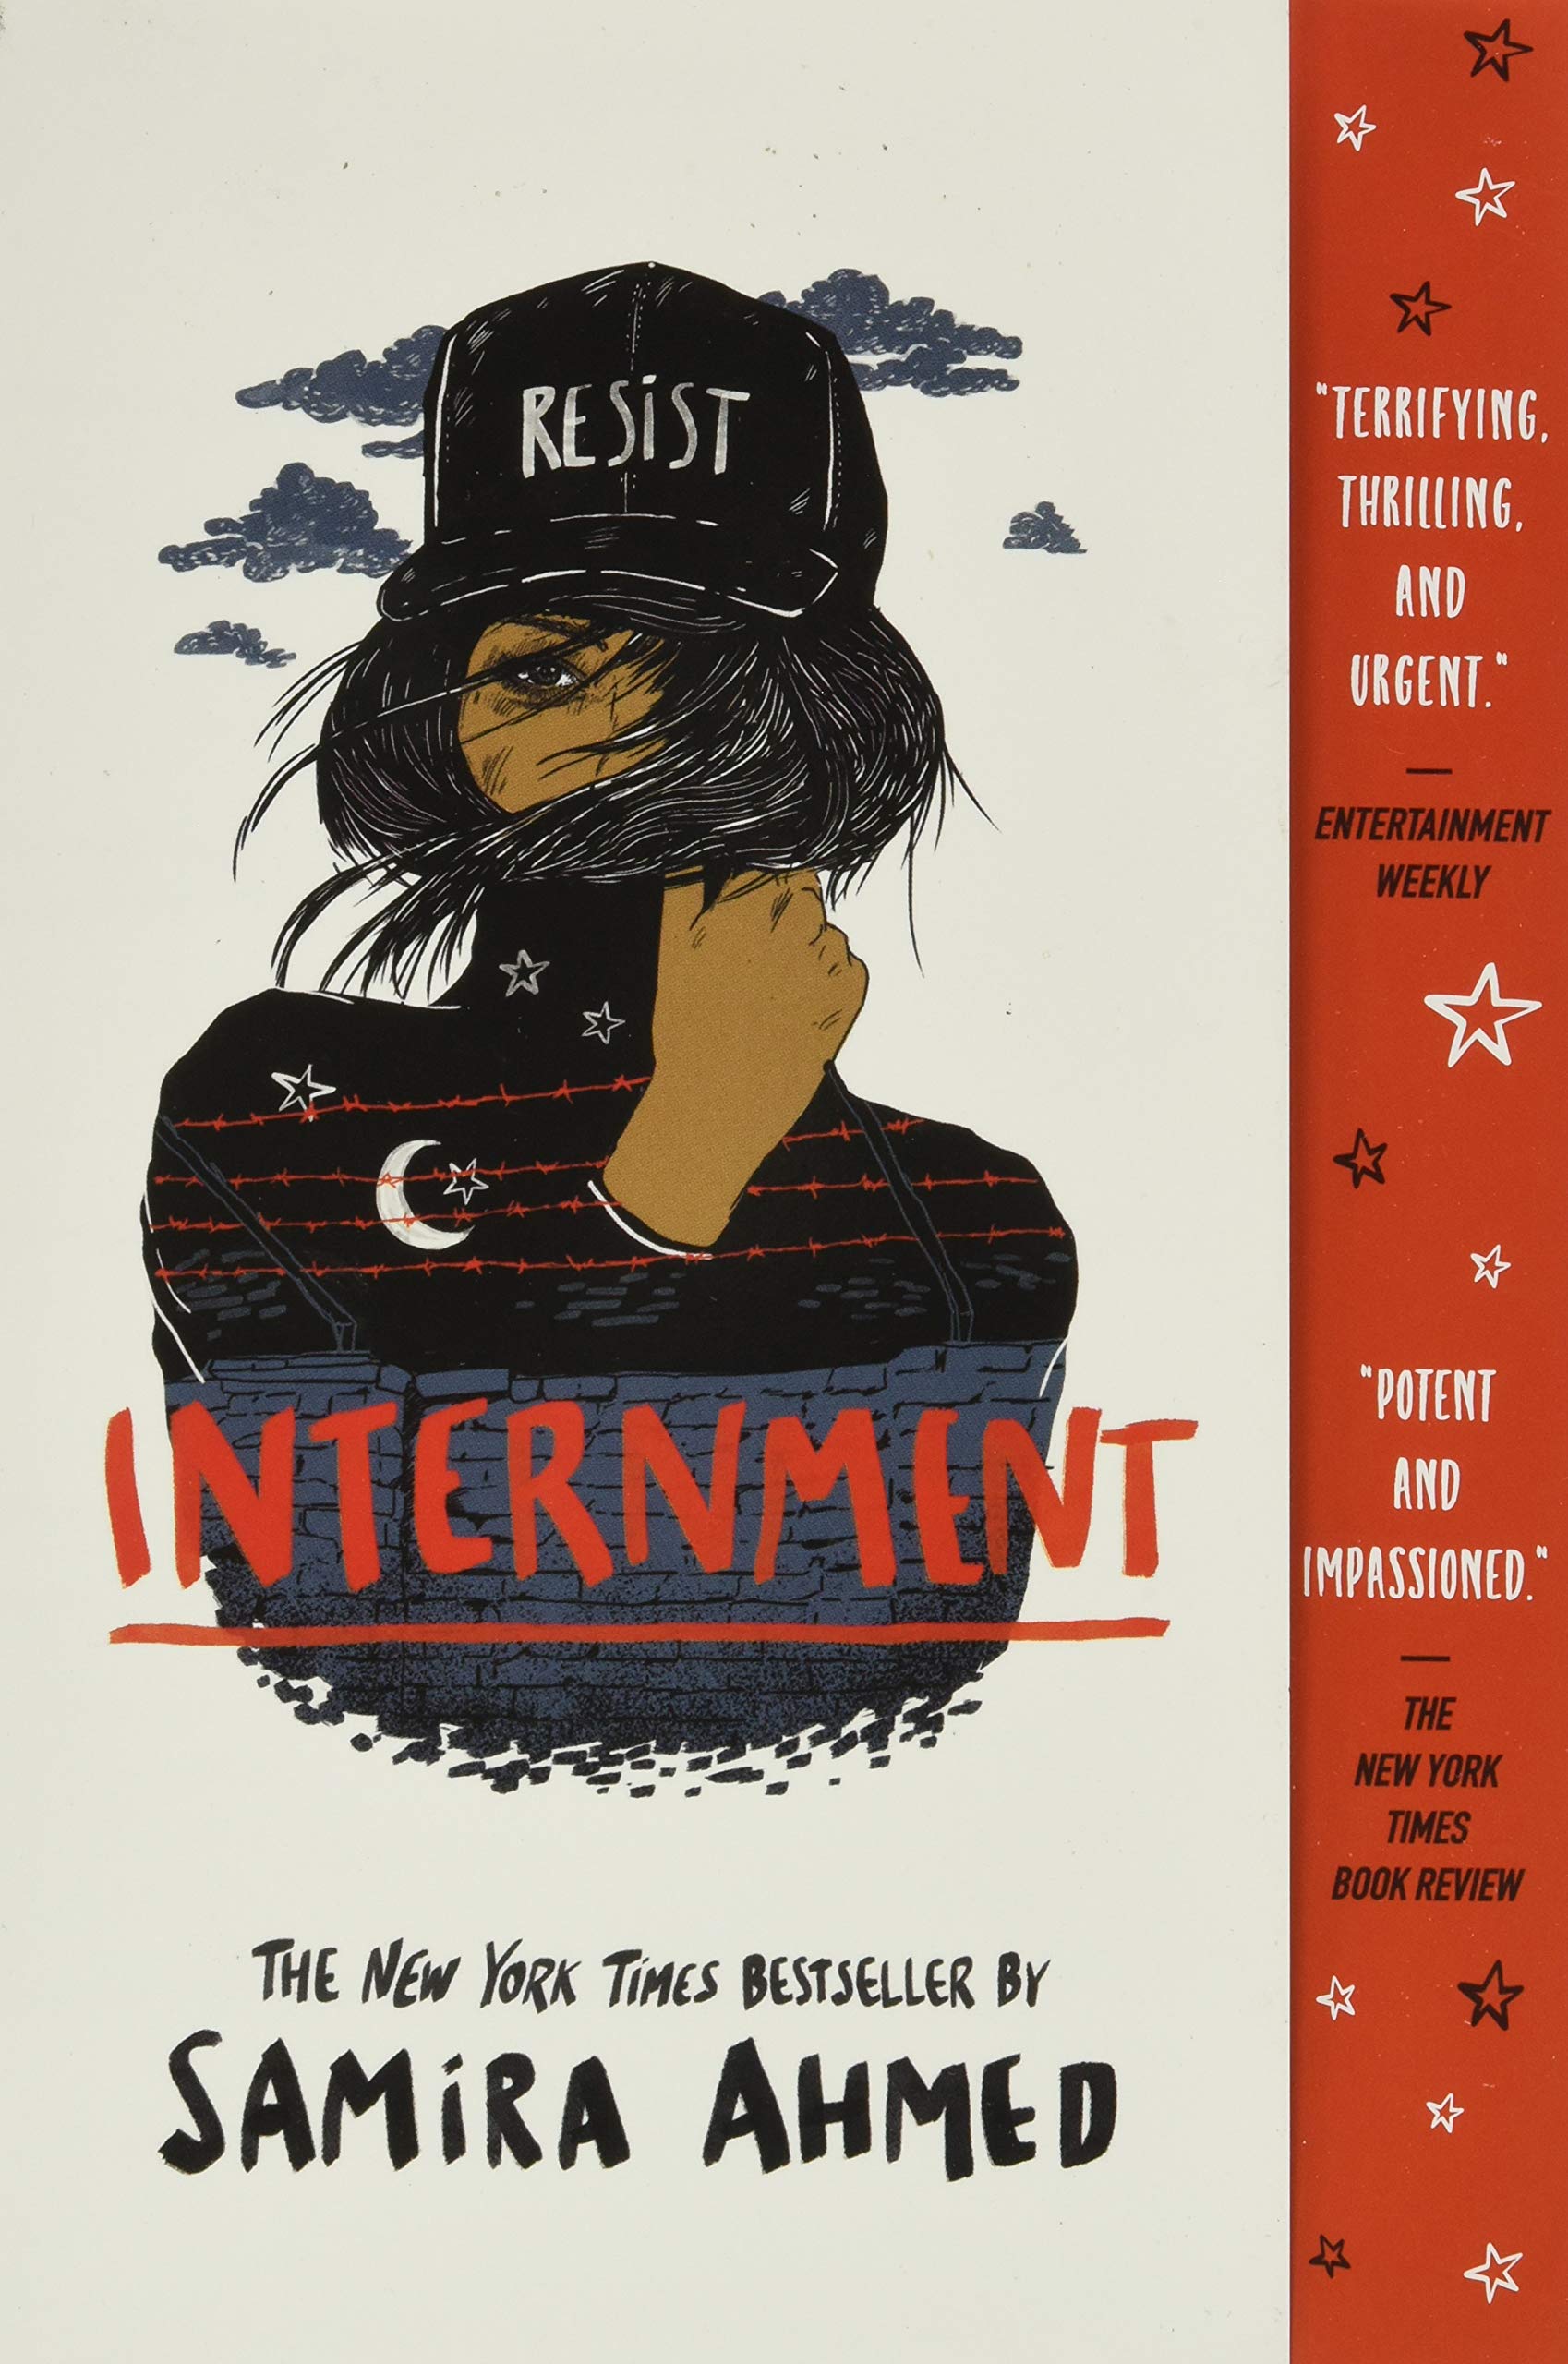 Image for "Internment"